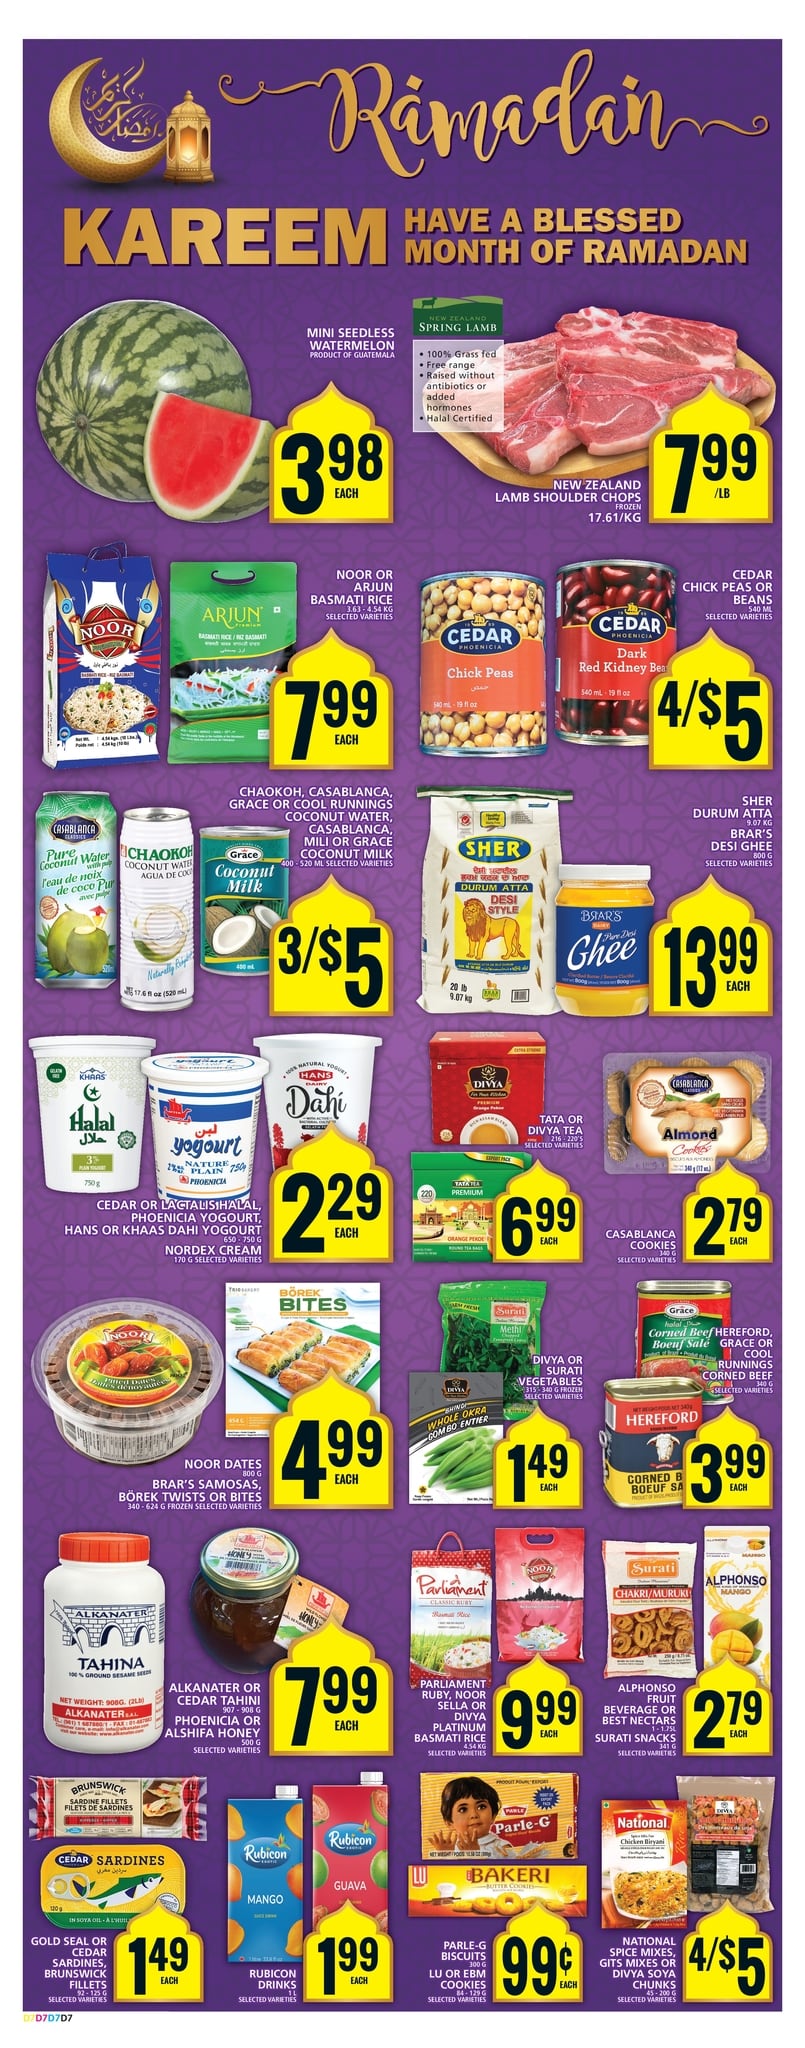 Food Basics - Weekly Flyer Specials - Page 9